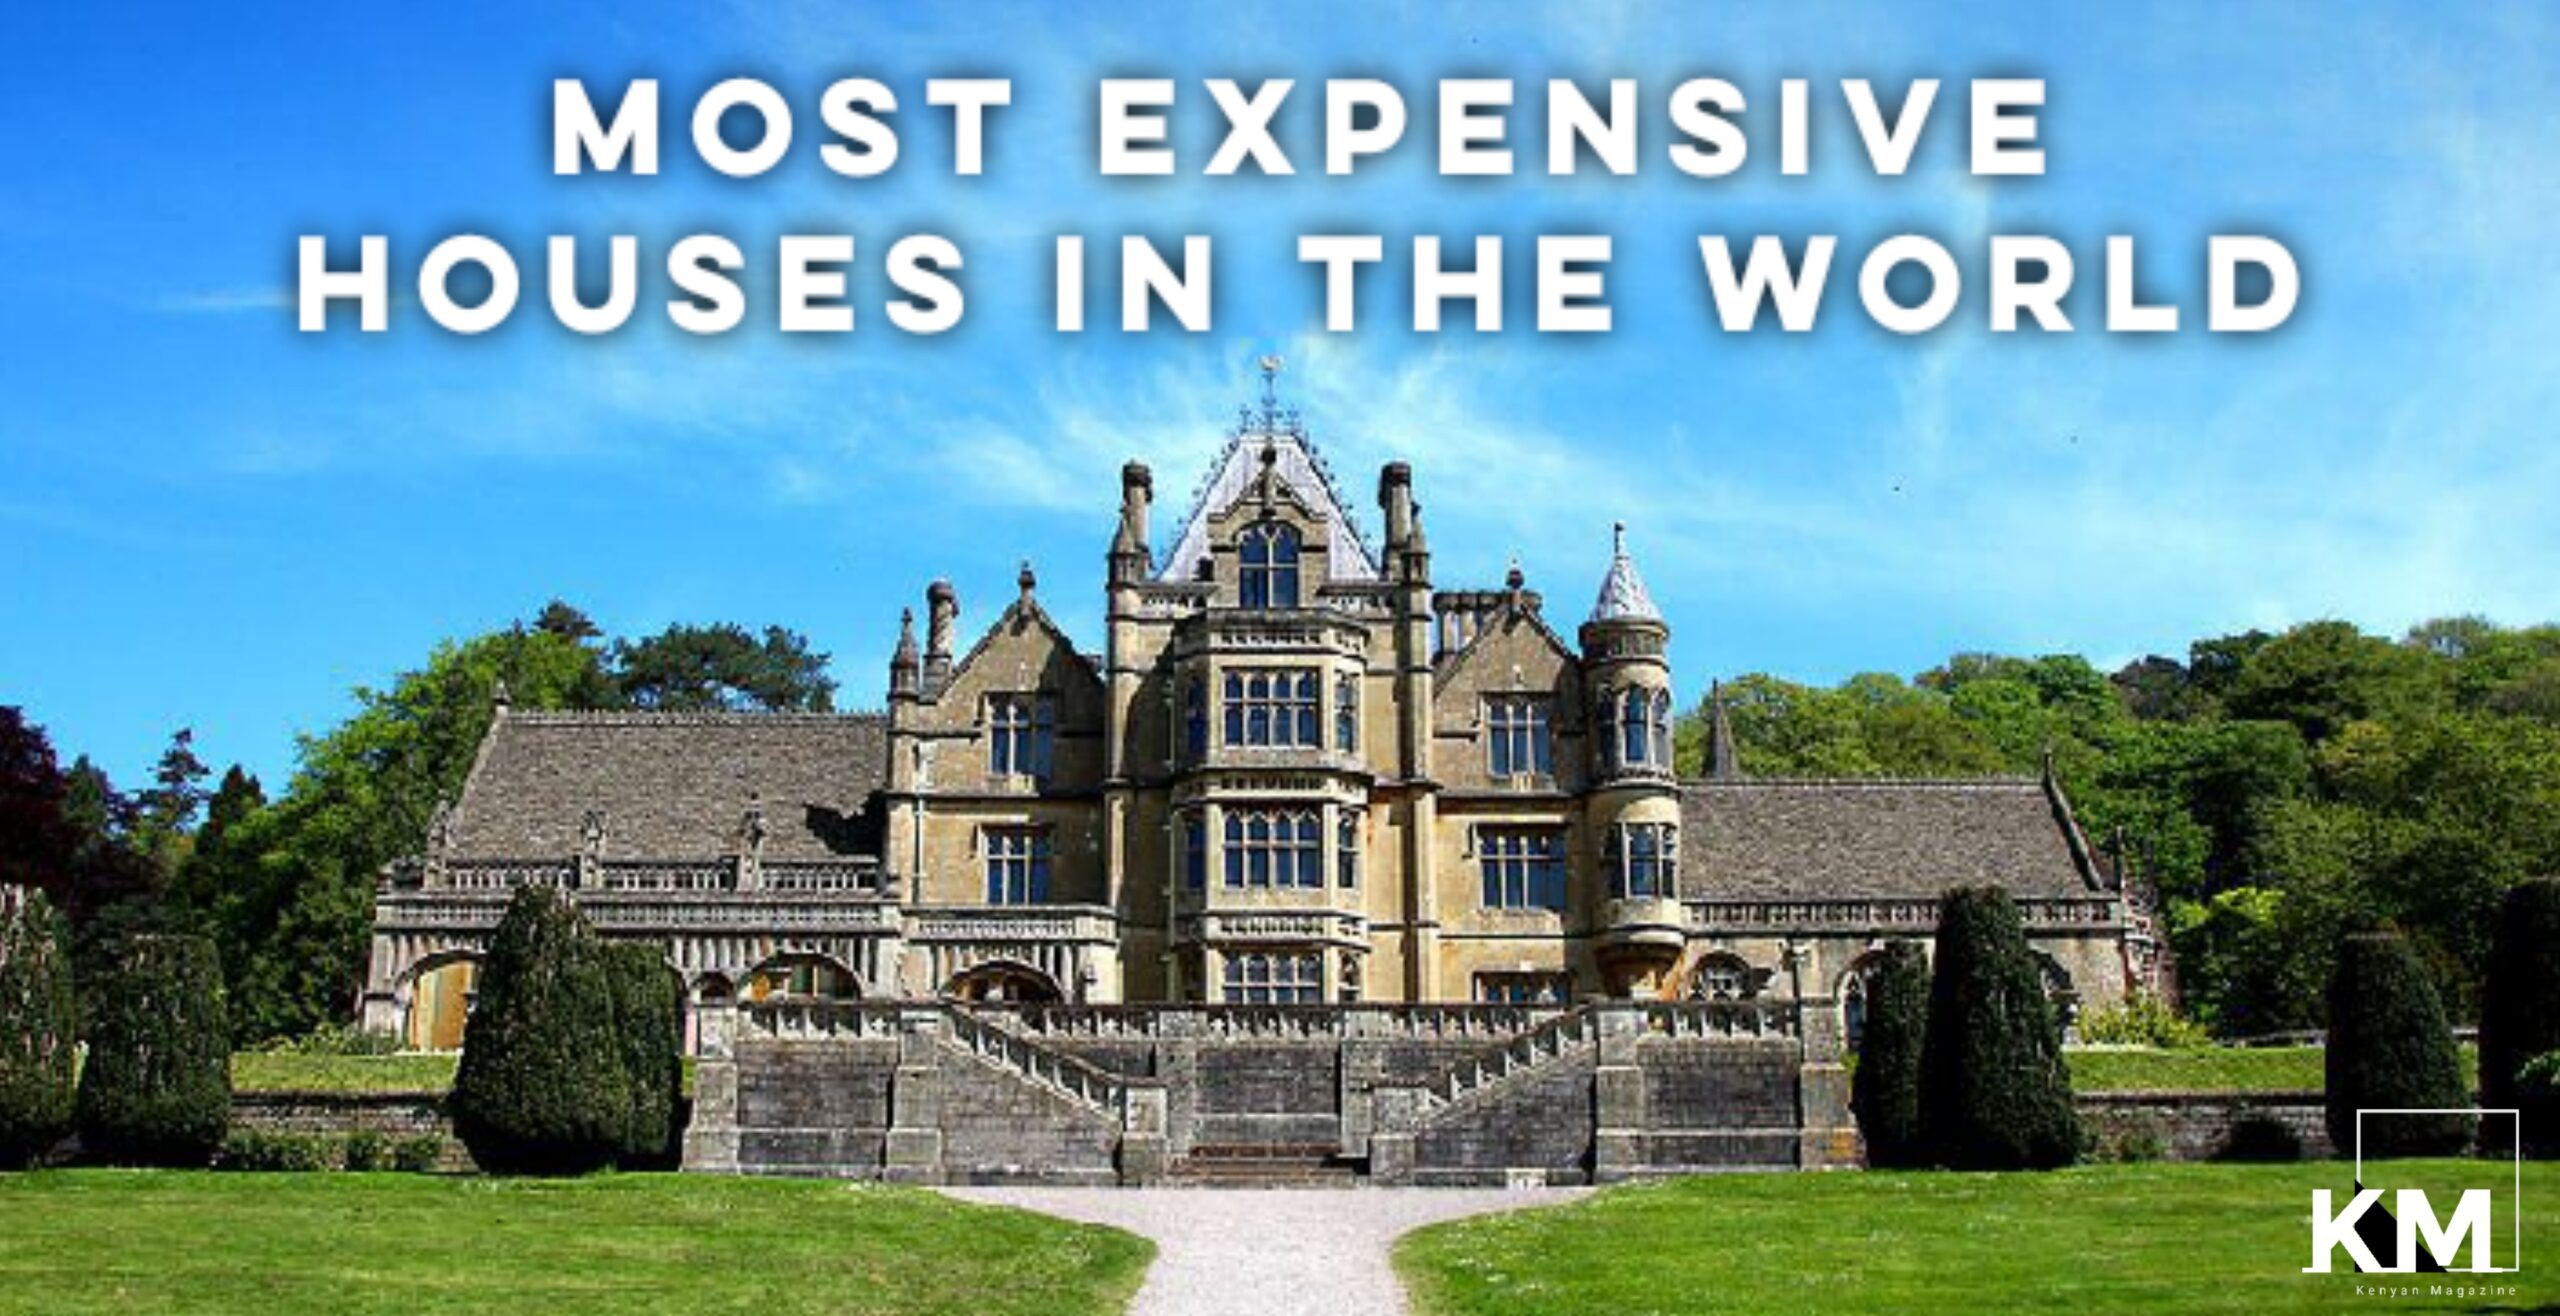 Most expensive houses in the world